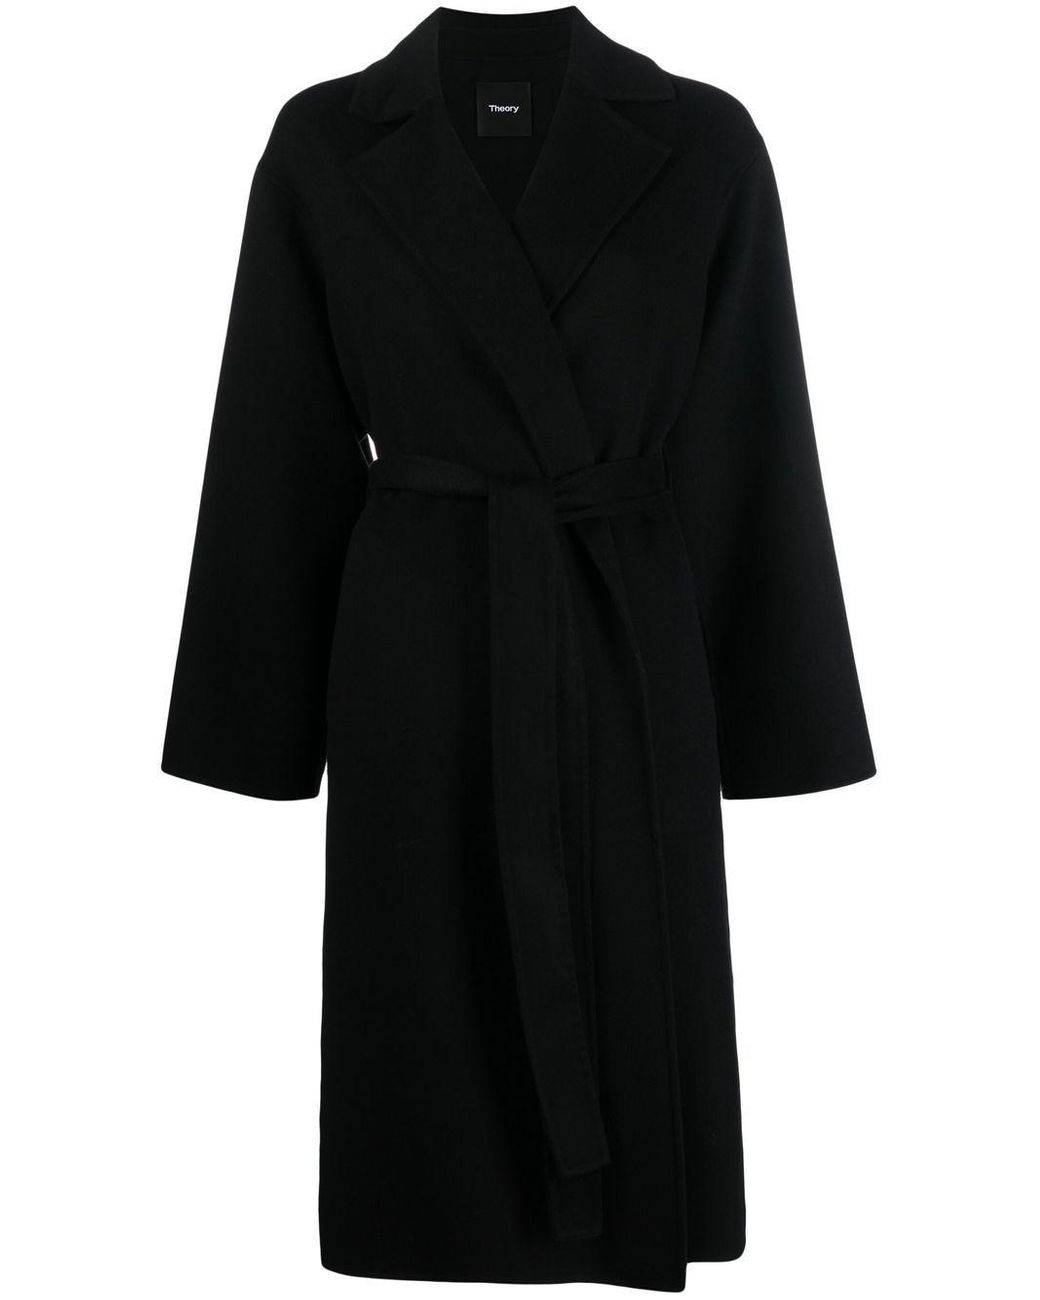 Theory Belted Midi Trench Coat in Black | Lyst